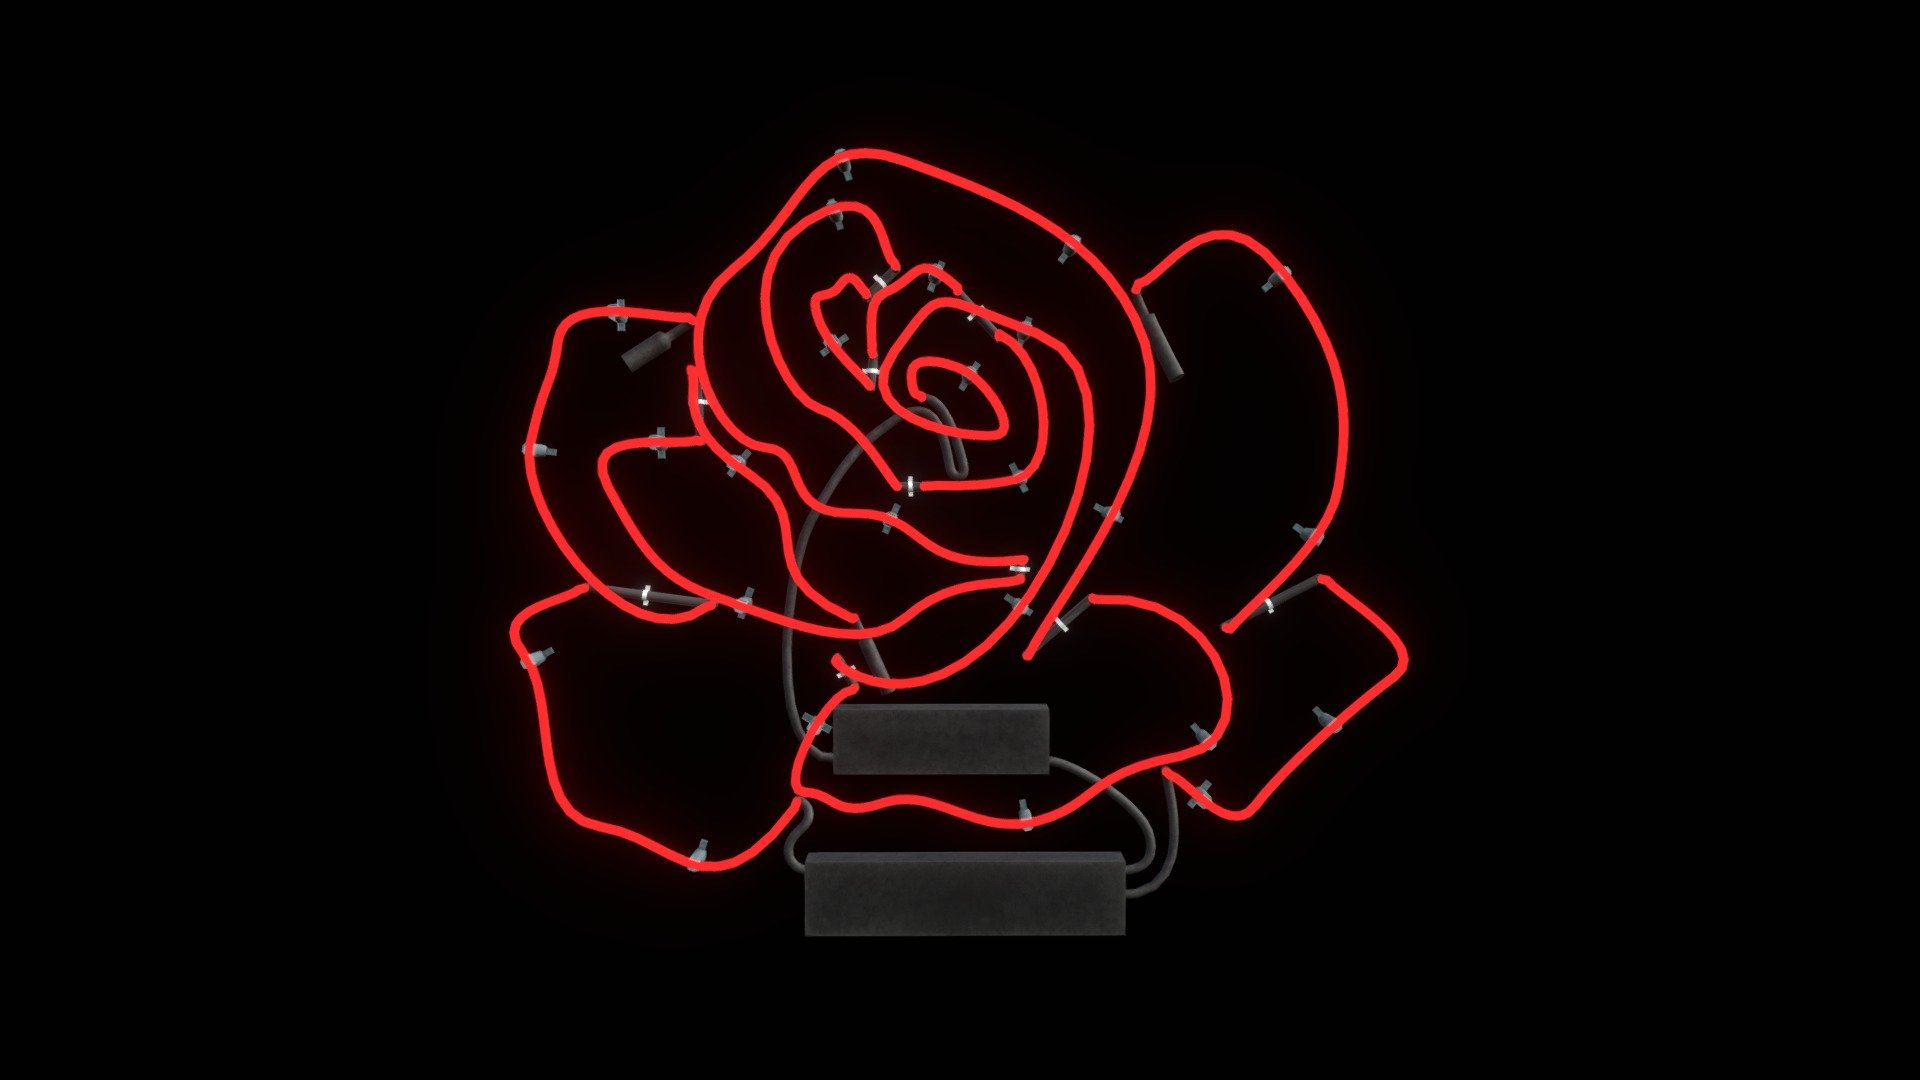 A emisive neon rose light. Low poly, game and Virtual reality ready 3d model